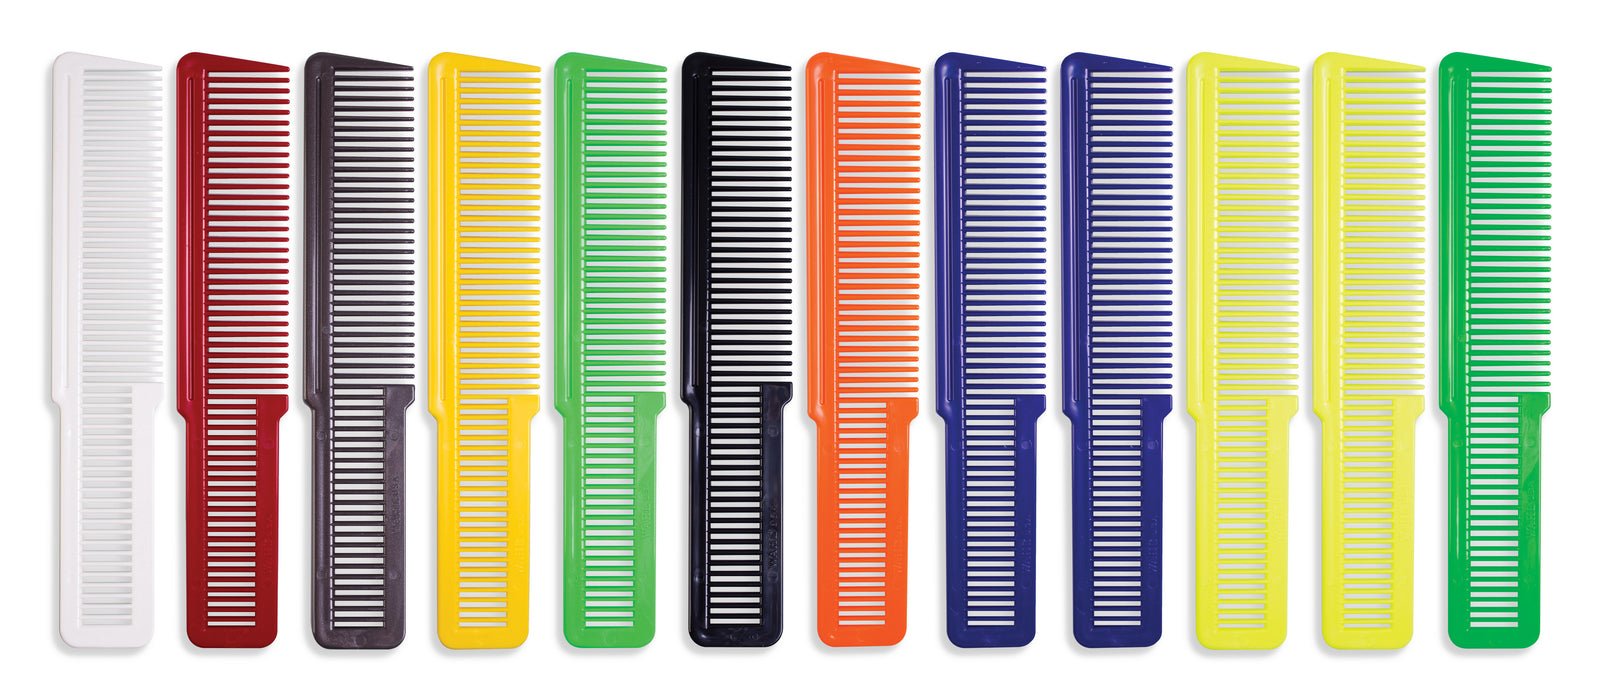 Wahl 12 Pack Flat Top Coloured Clipper Combs